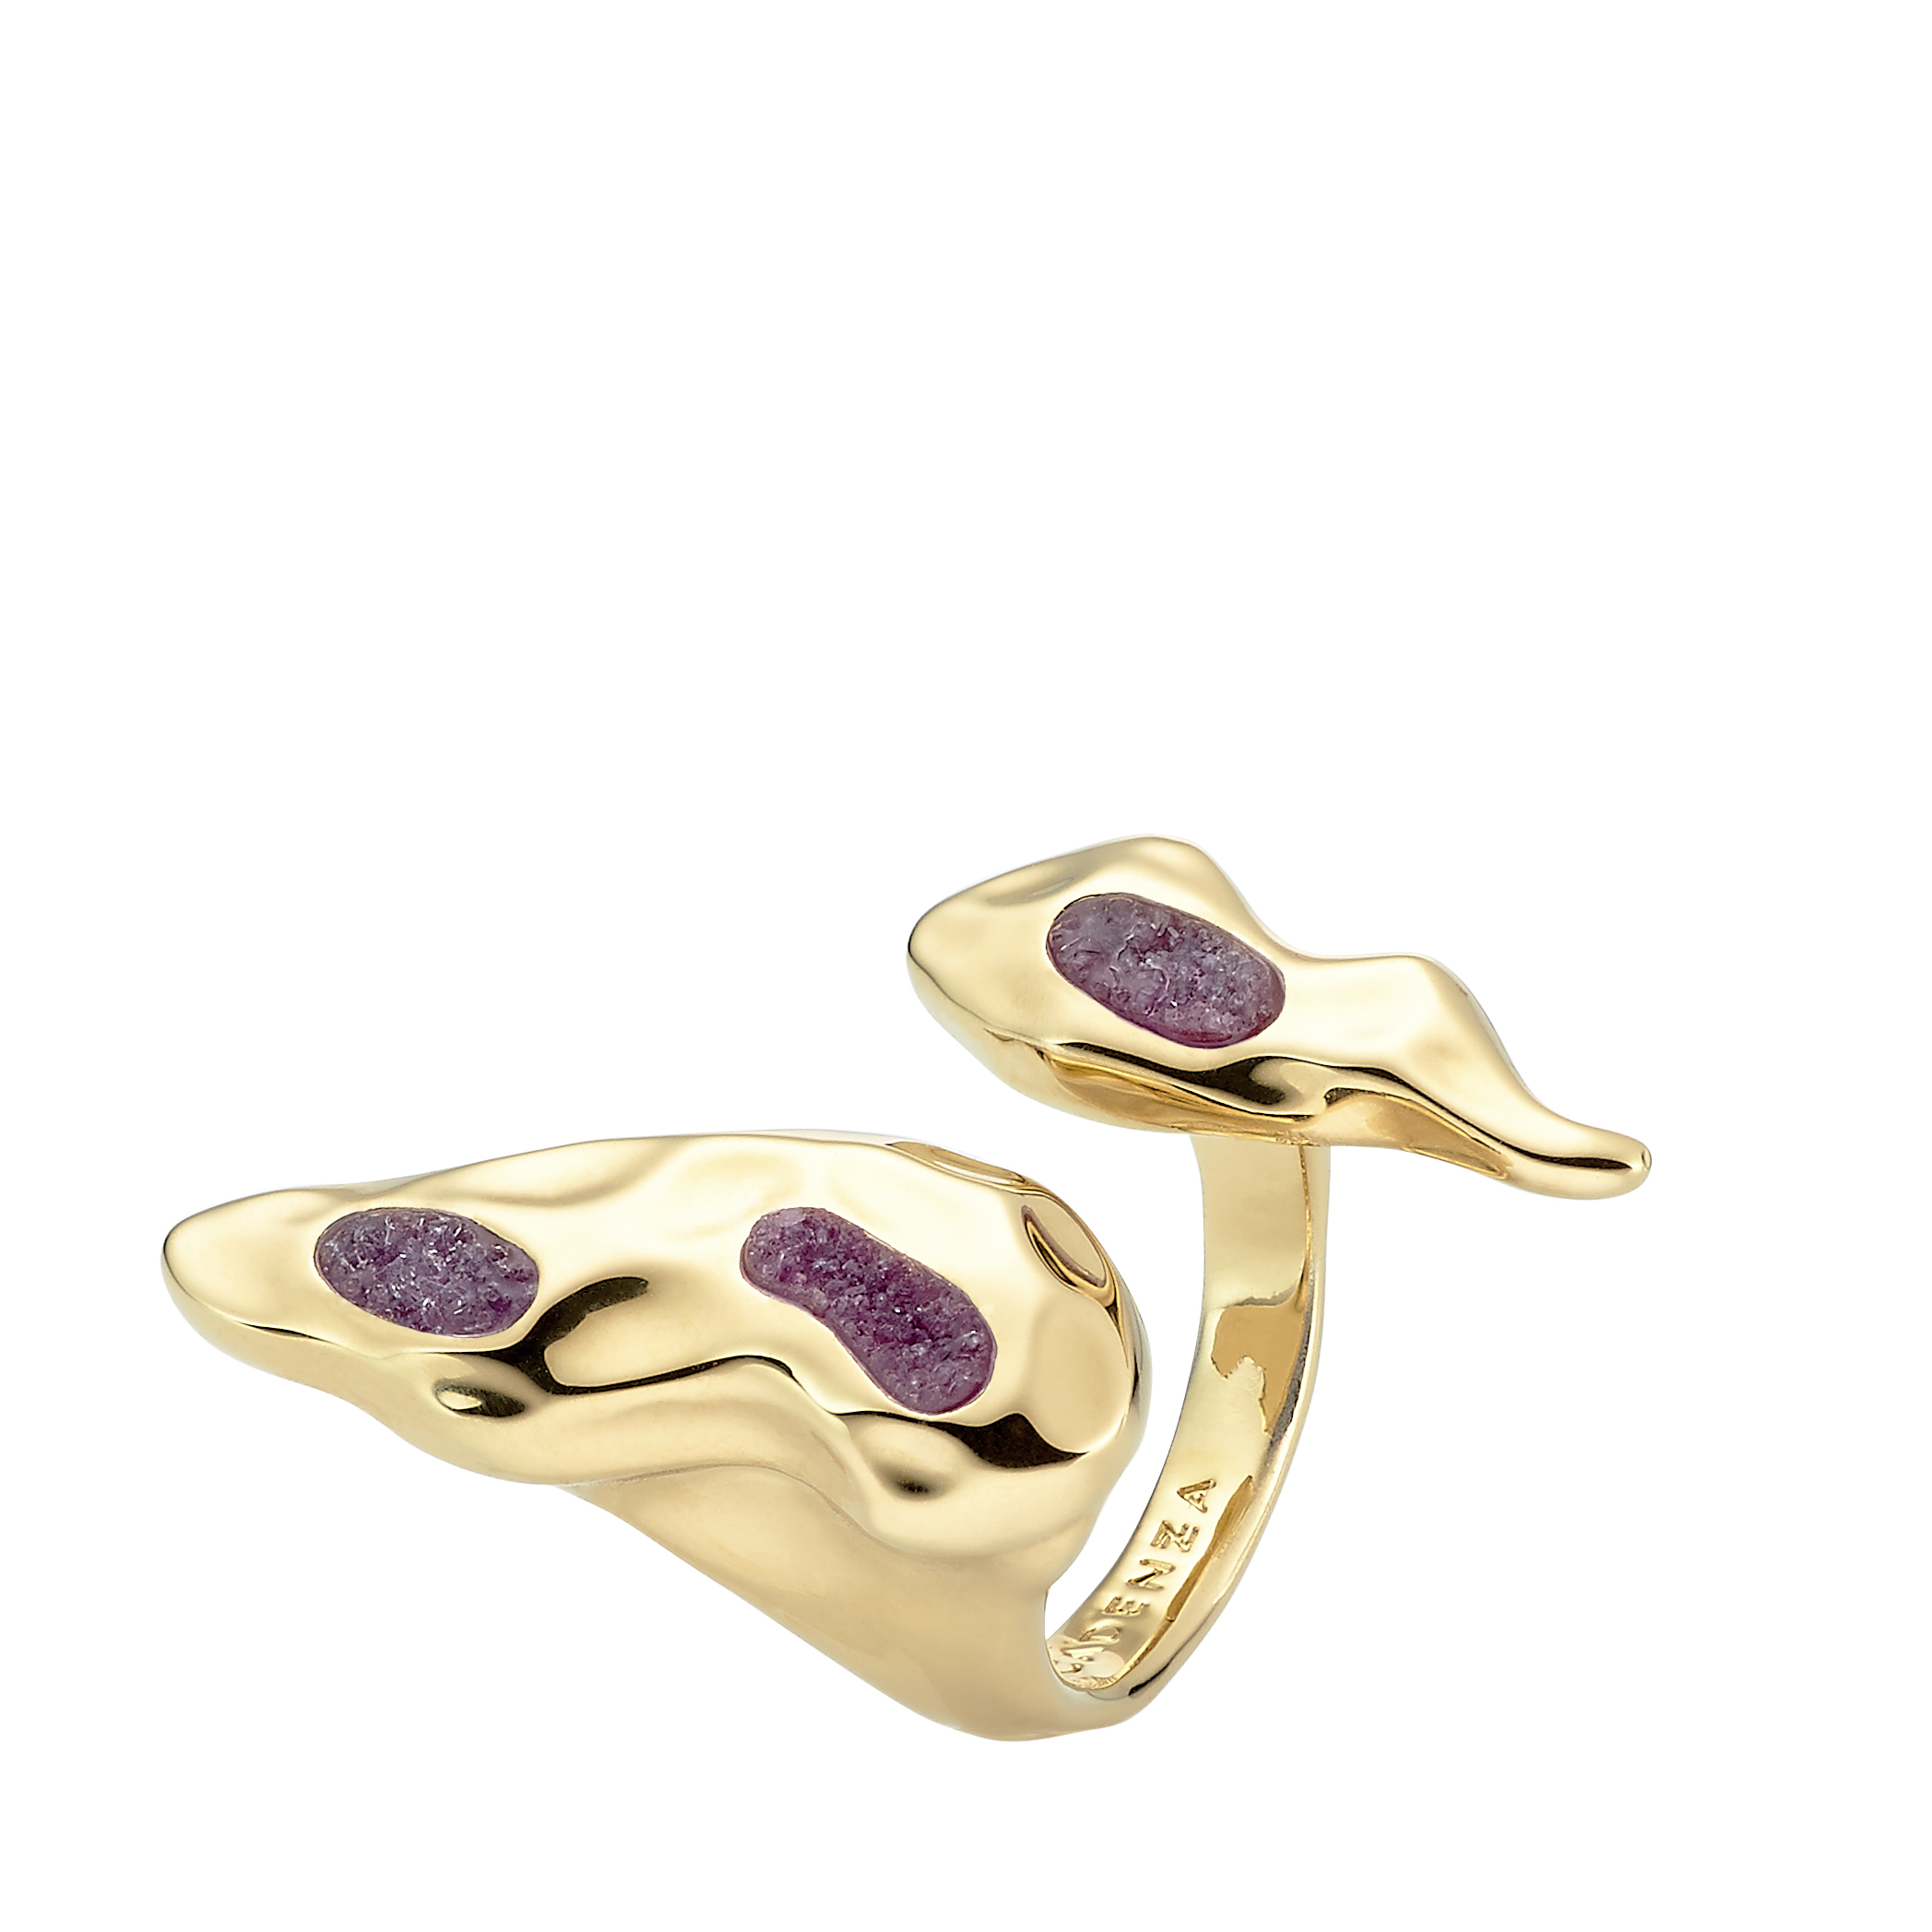 Copy of Ring in Gold with purple Achate Gemstones